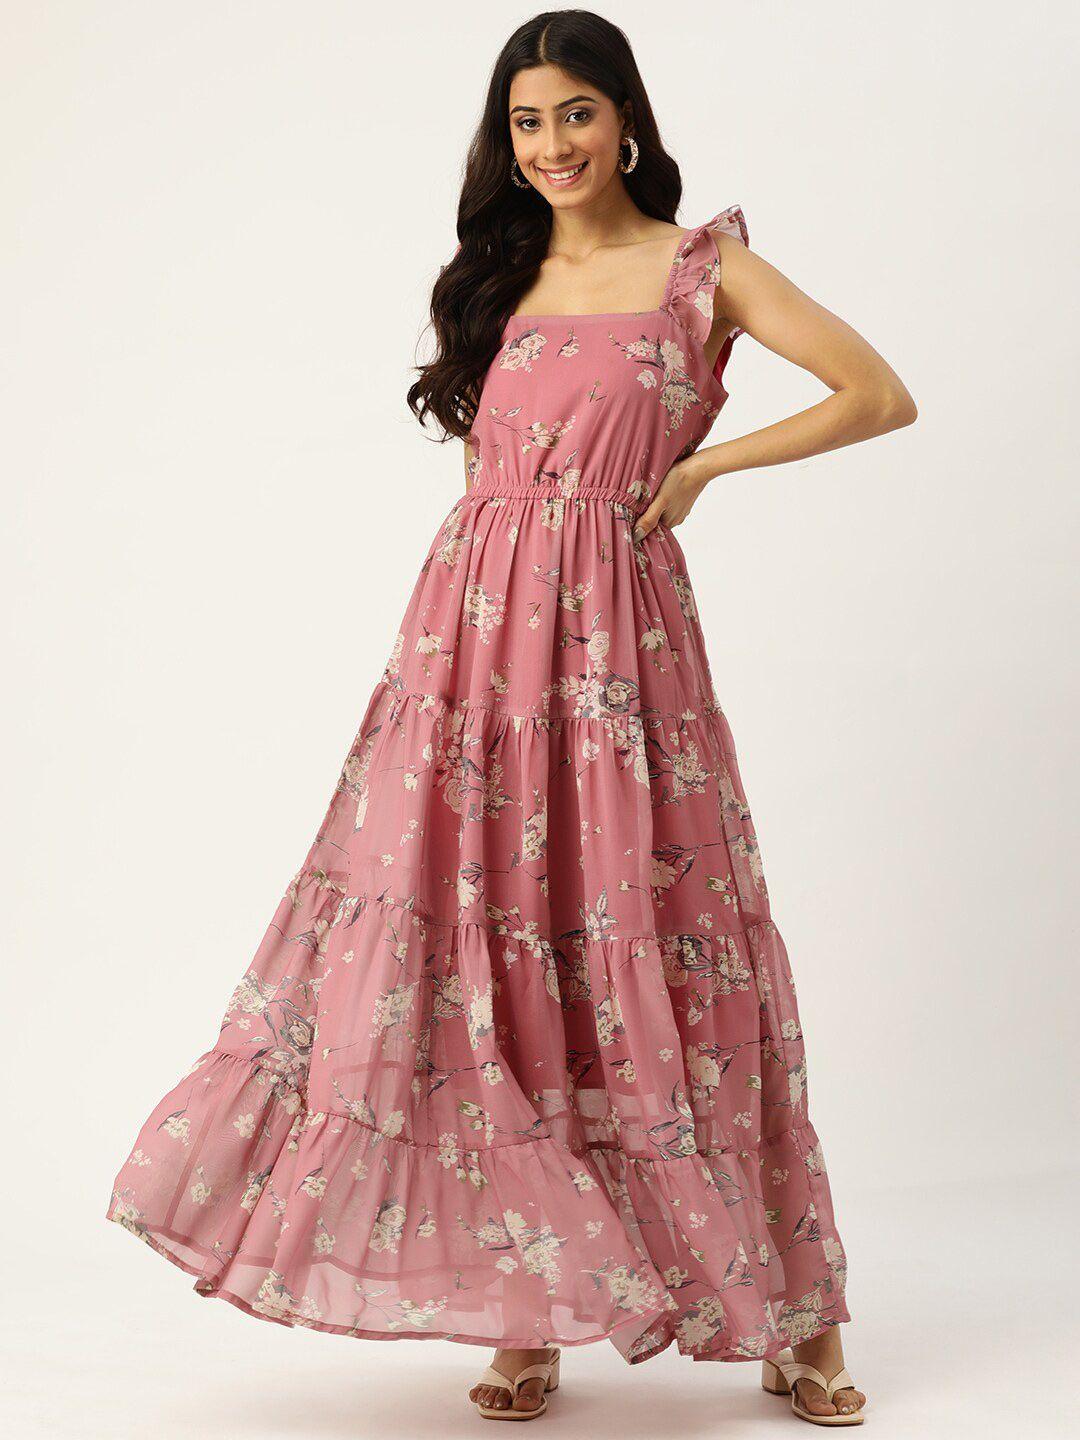 dressberry-pink-&-beige-floral-printed-ruffled-fit-&-flare-dress